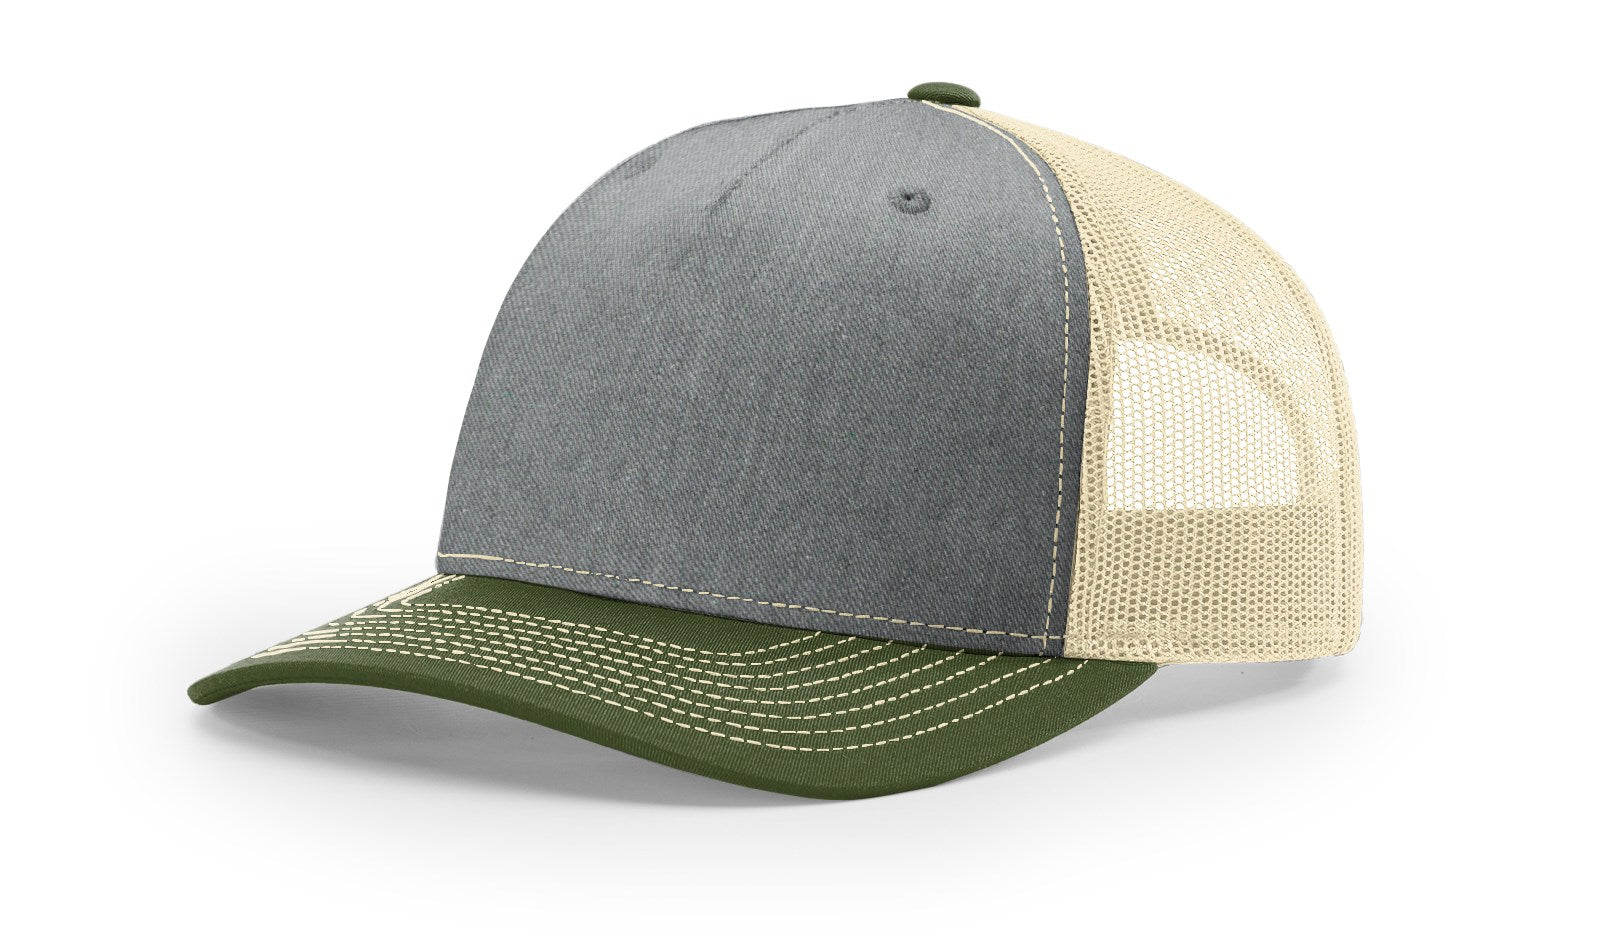 Heather Grey/Birch/Army Olive color variant